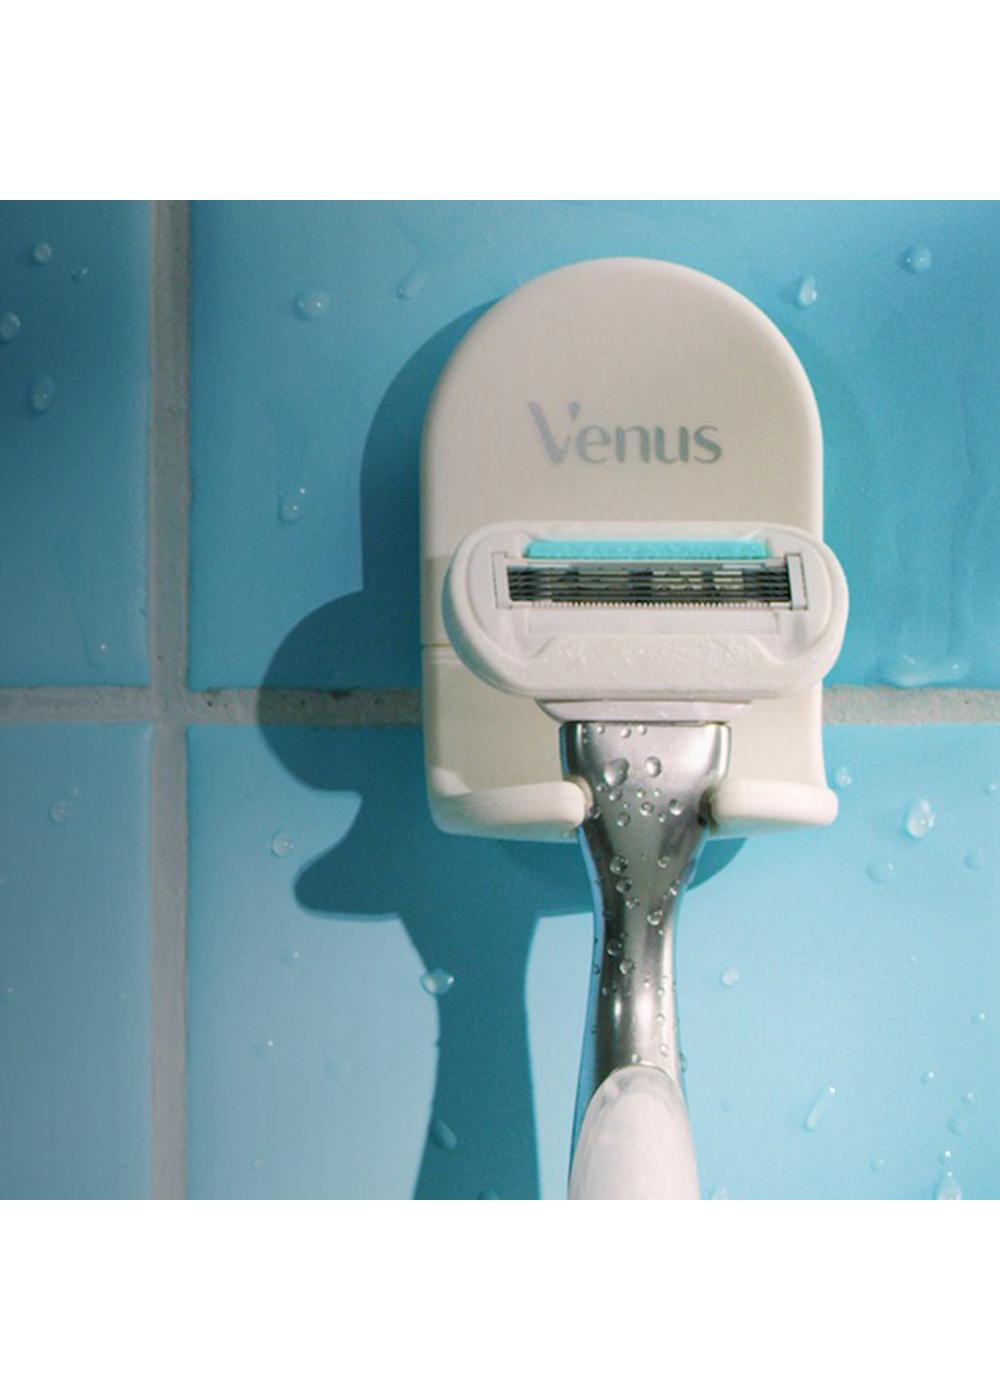 Gillette Venus Deluxe Smooth Sensitive Razor with 2 Cartridges; image 5 of 9